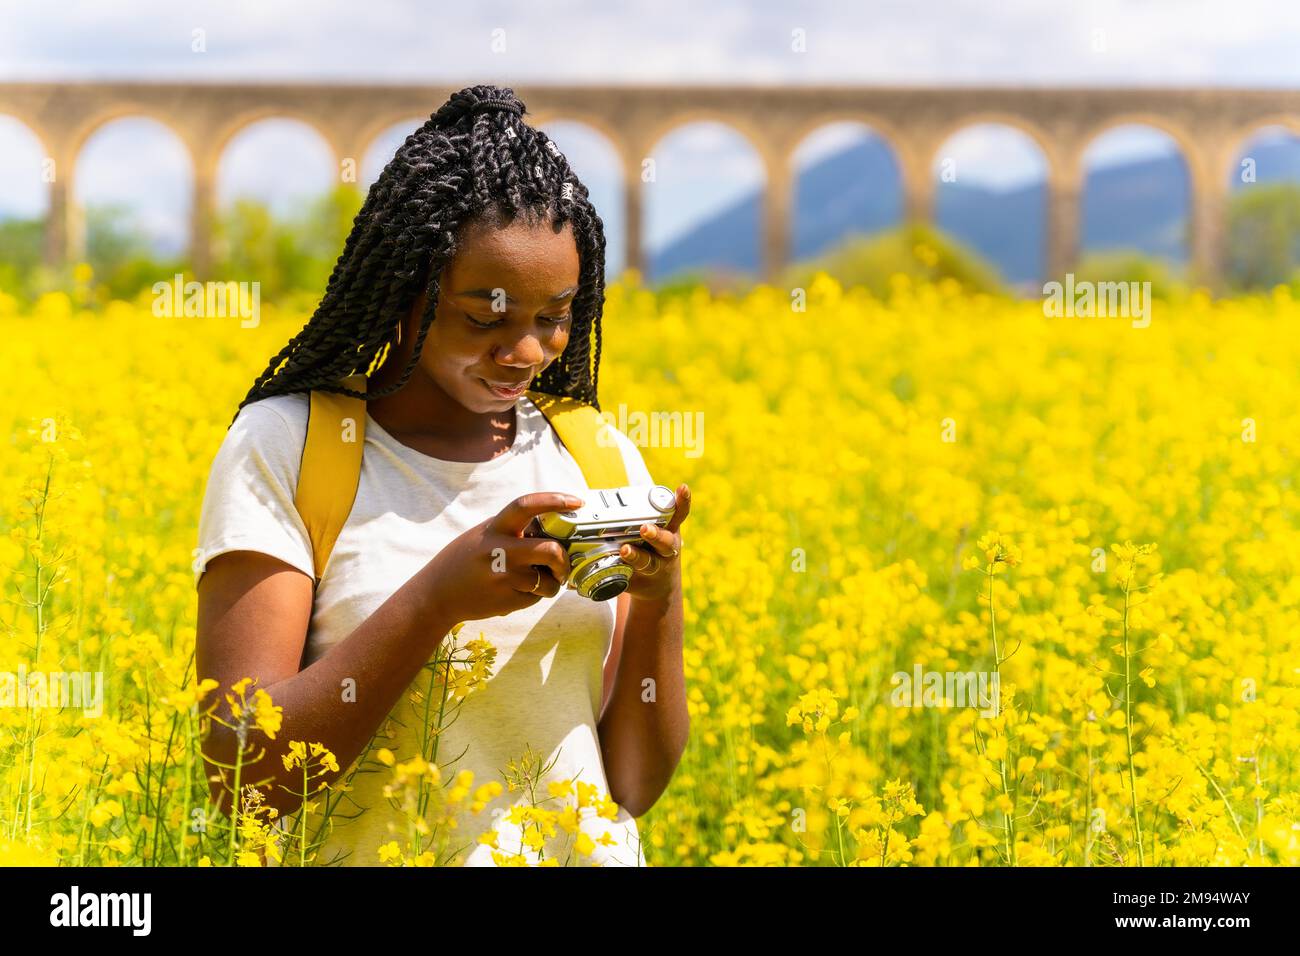 Looking at the photos on a vintage camera, a black ethnic girl with braids, a traveler, in a field of yellow flowers Stock Photo